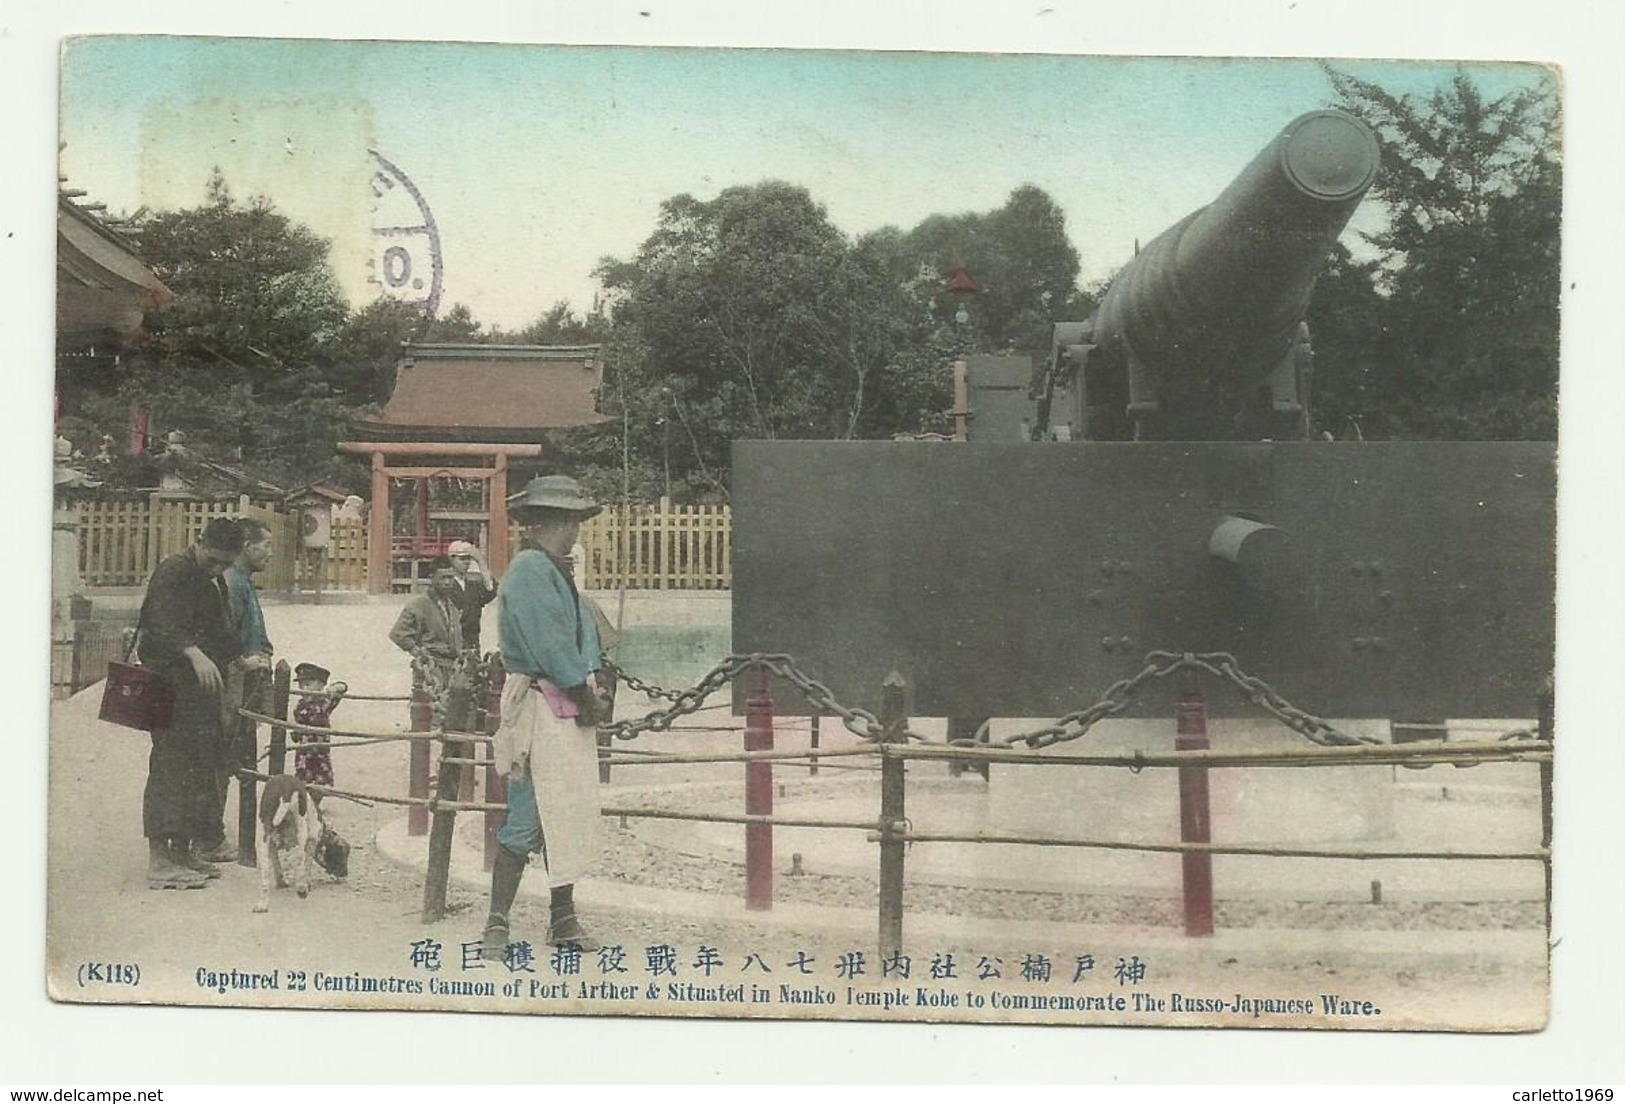 CAPTURED 22 CENTIMETRES OF PORT ARTHER & SITUATED IN NANKO TEMPLE KOBE TO COMMEMORATE THE RUSSO-JAPANESE WAR  FP - Kobe